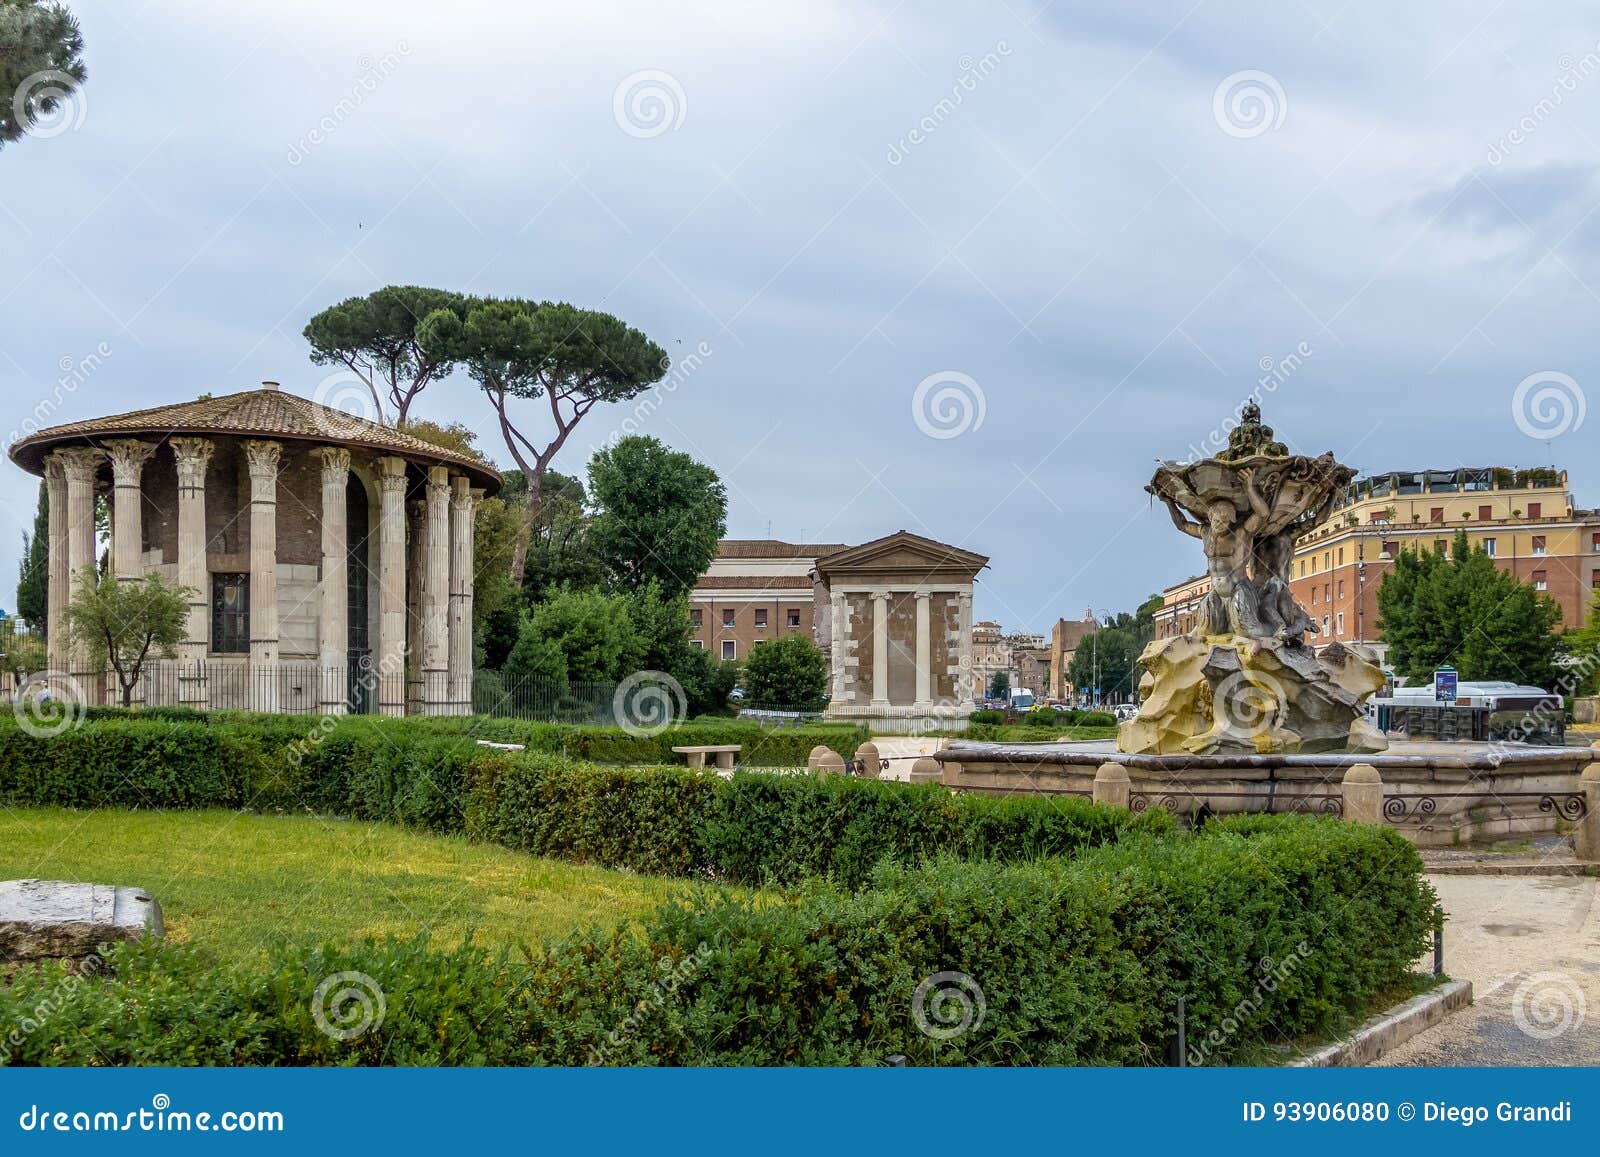 tritons fountain and temple of hercules victor - rome, italy